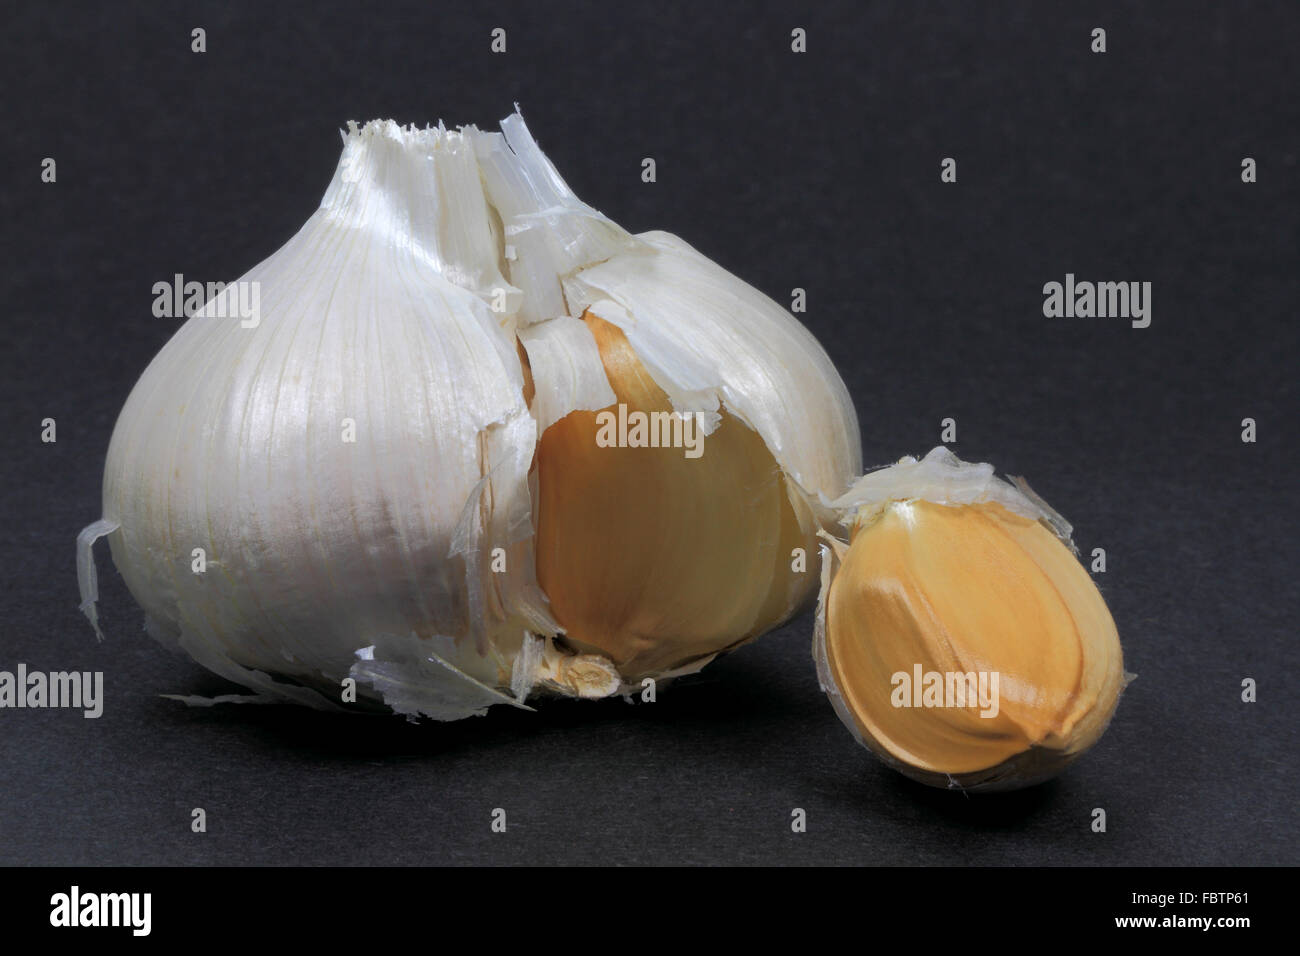 A guide to the different types of garlic